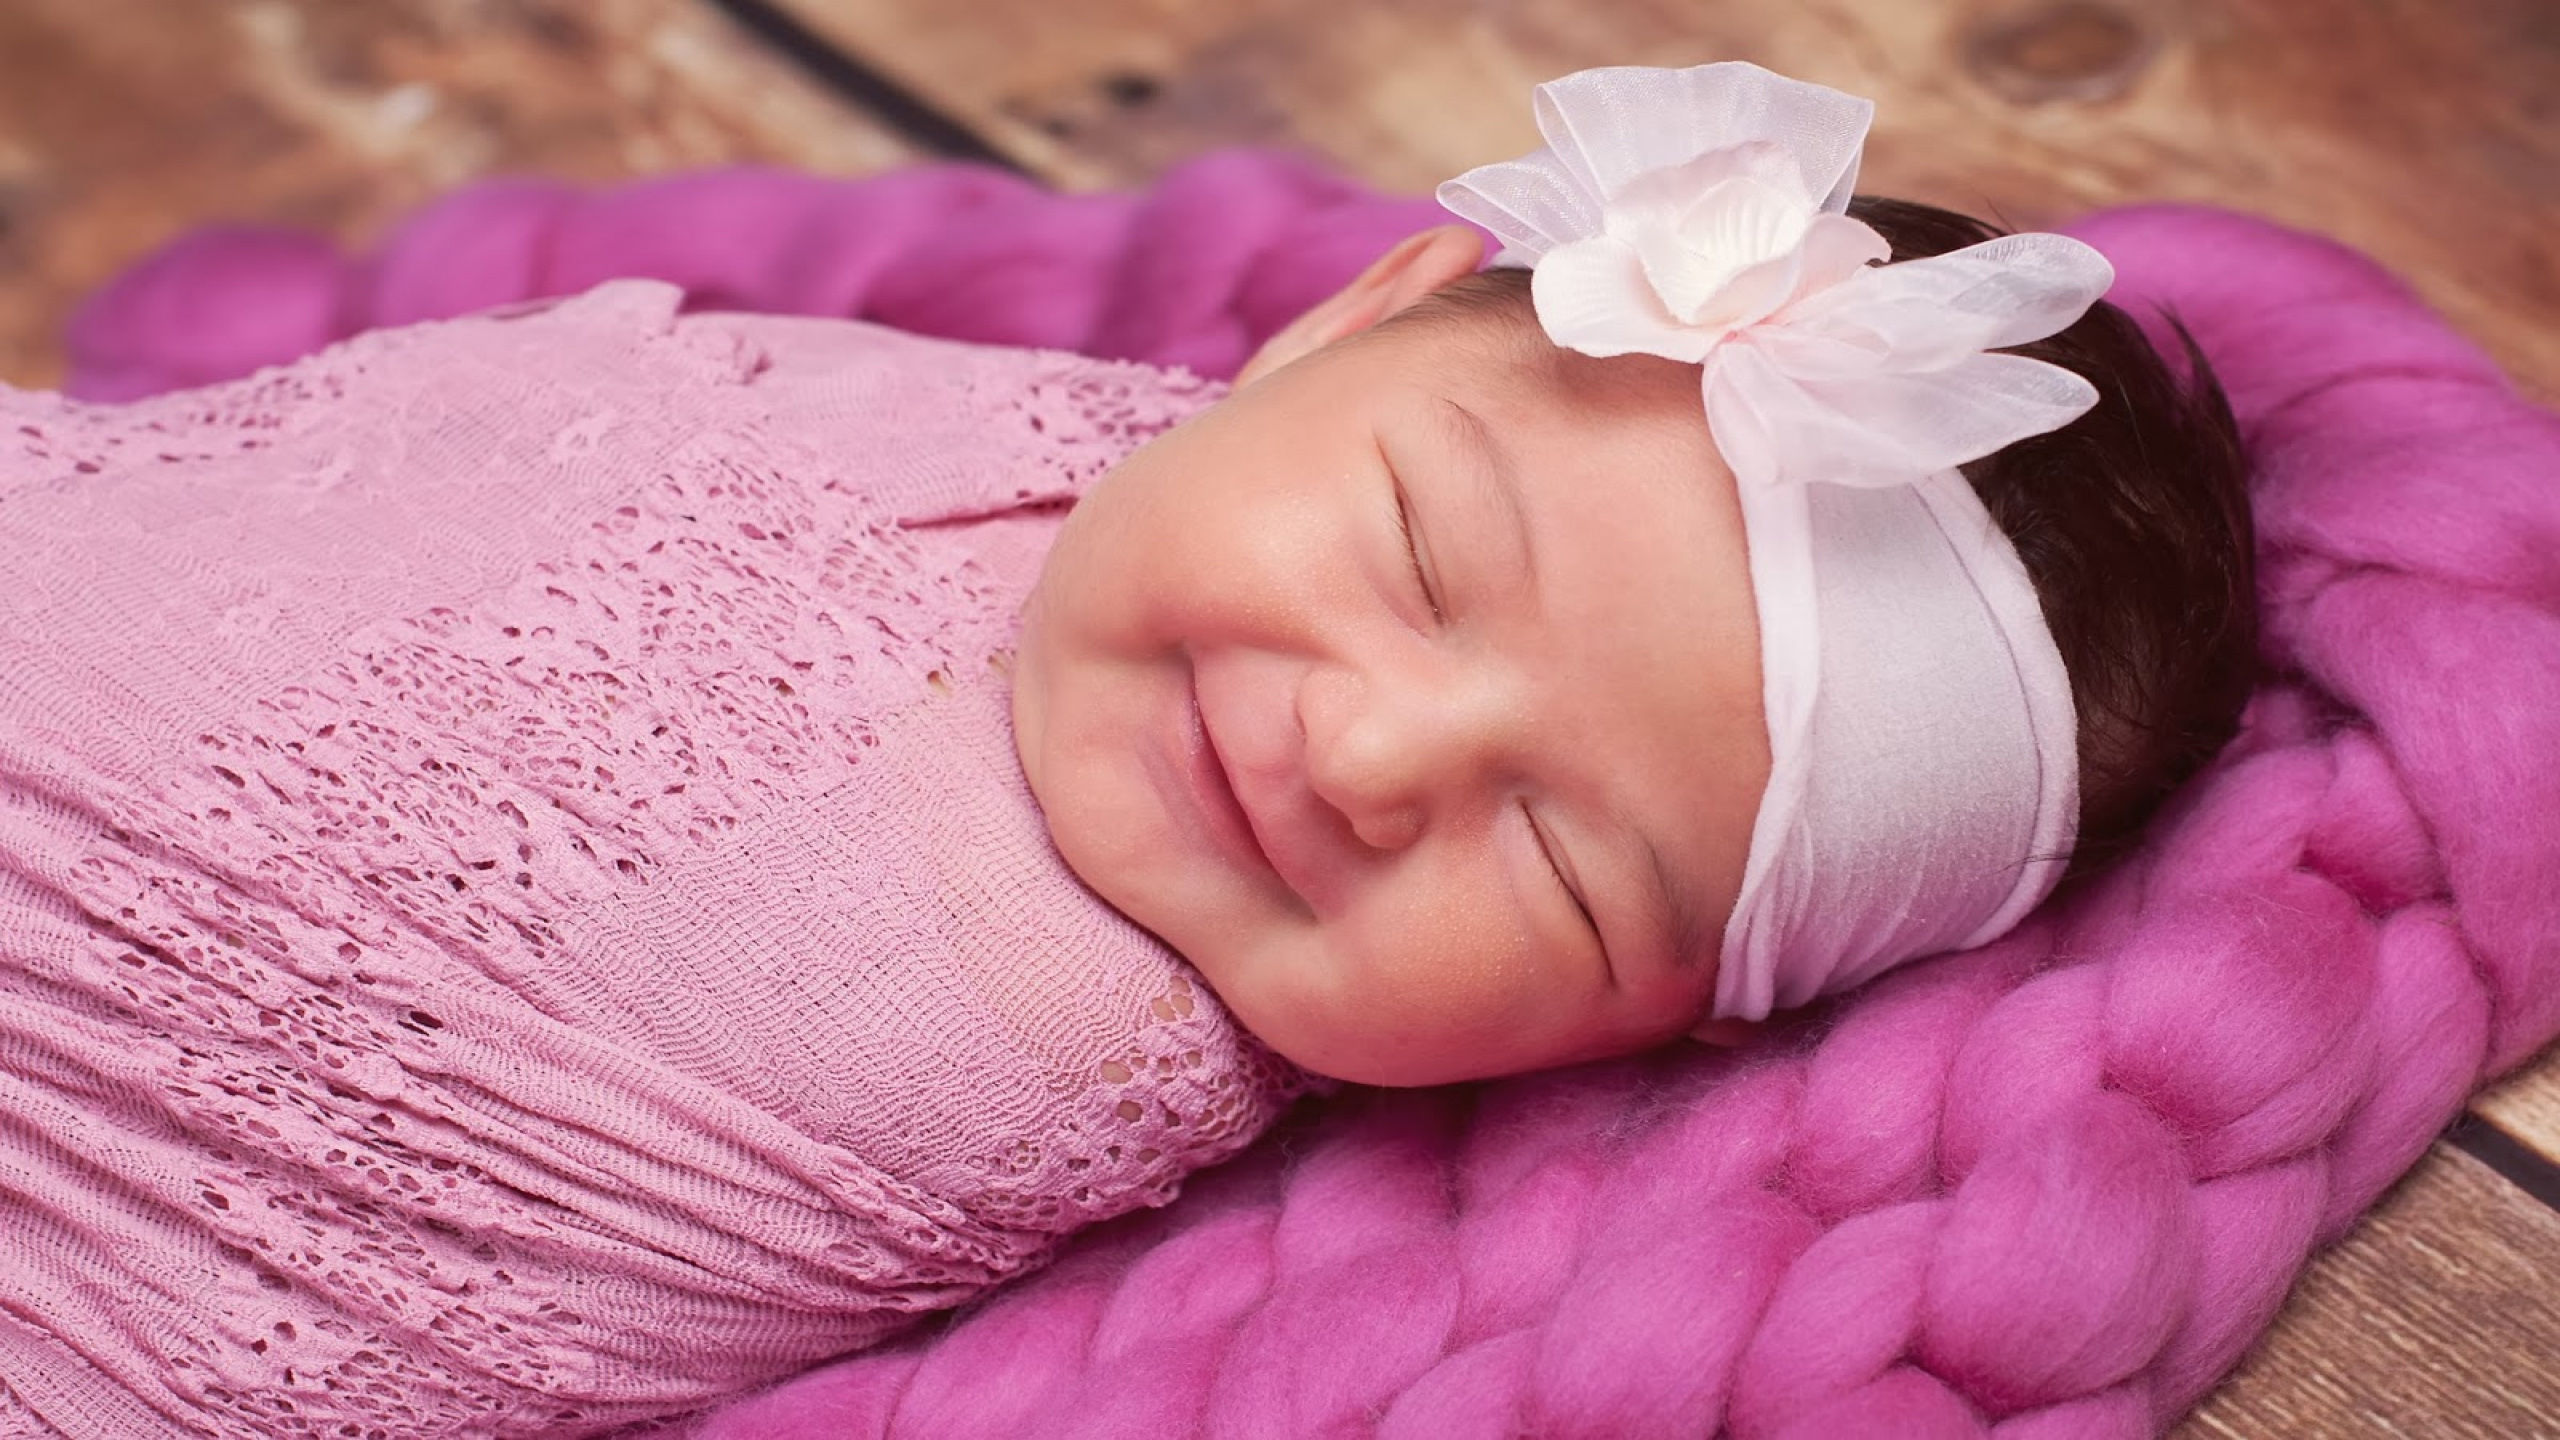 Smiley Cute Closed Eye Baby Is Covered With Pink Netted Towel And Having White Ribbon Band On Head HD Cute